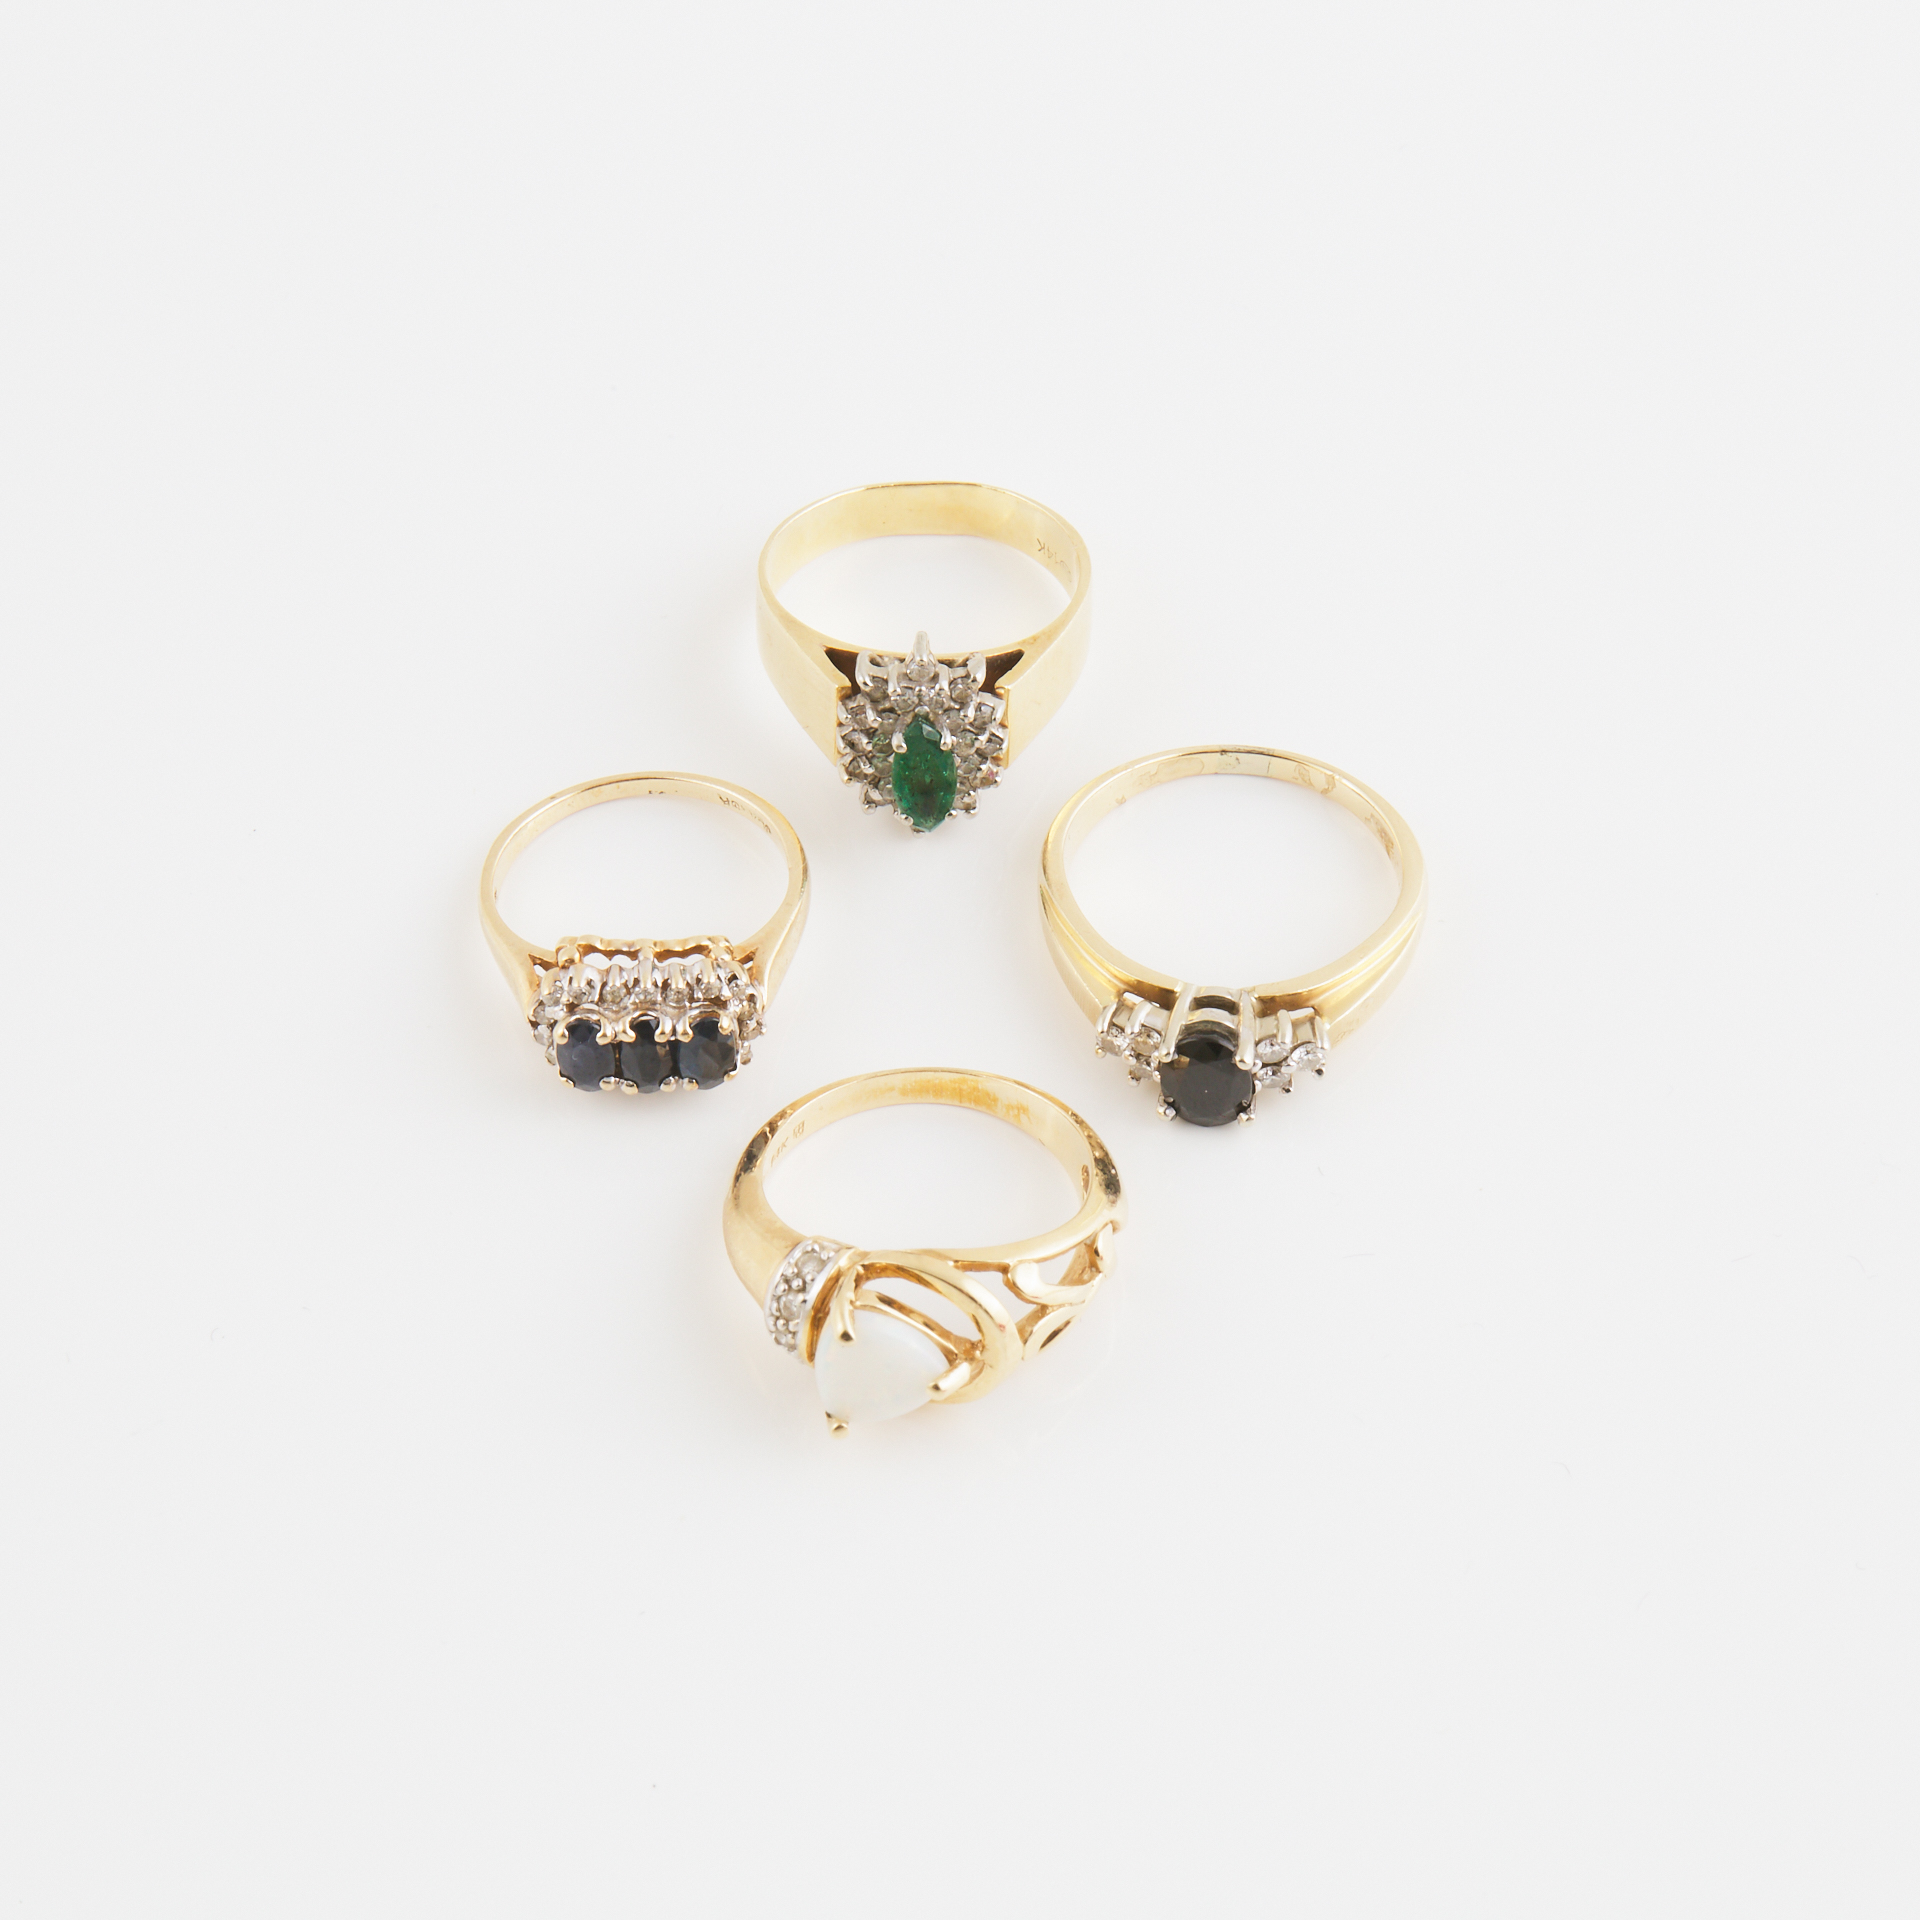 1 x 10k And 3 x 14k Yellow Gold Rings